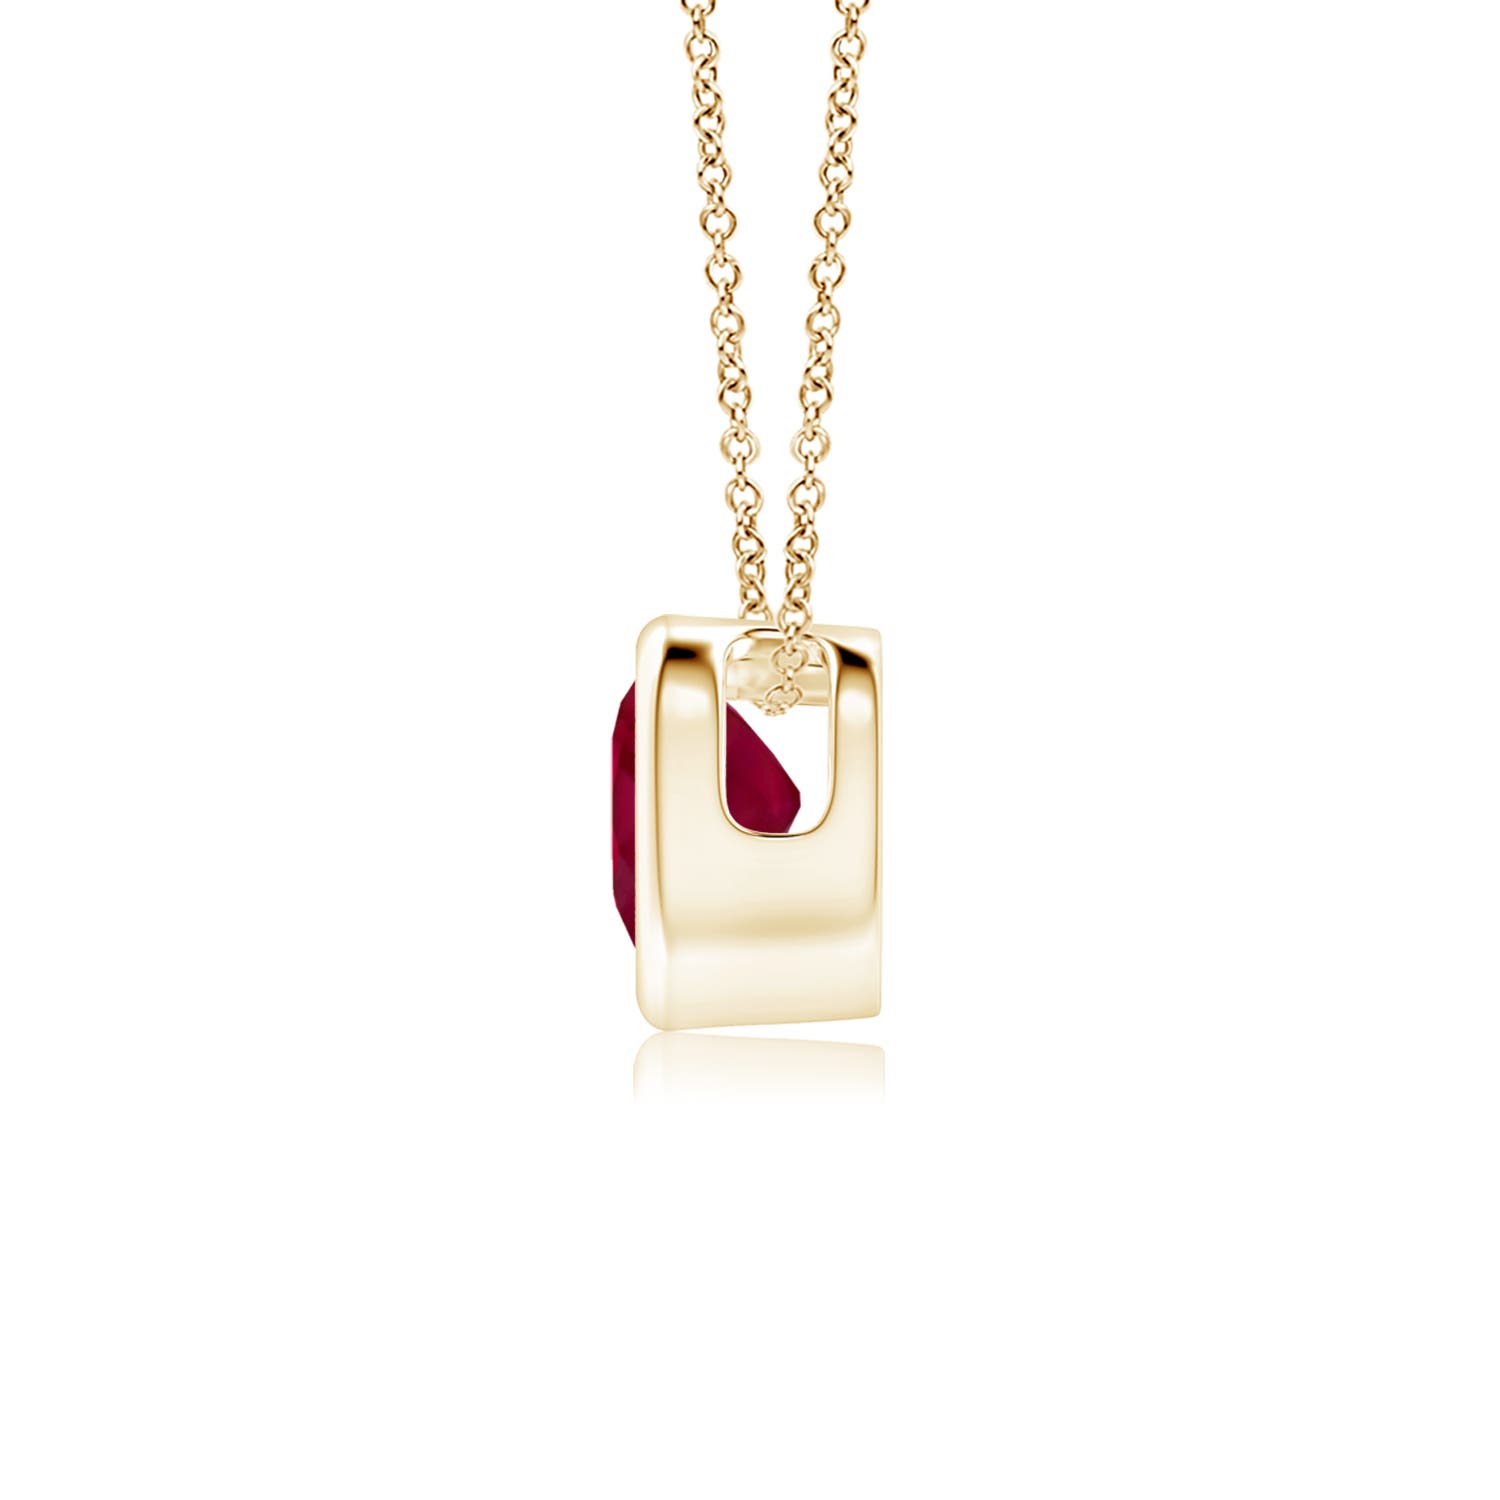 A - Ruby / 0.3 CT / 14 KT Yellow Gold